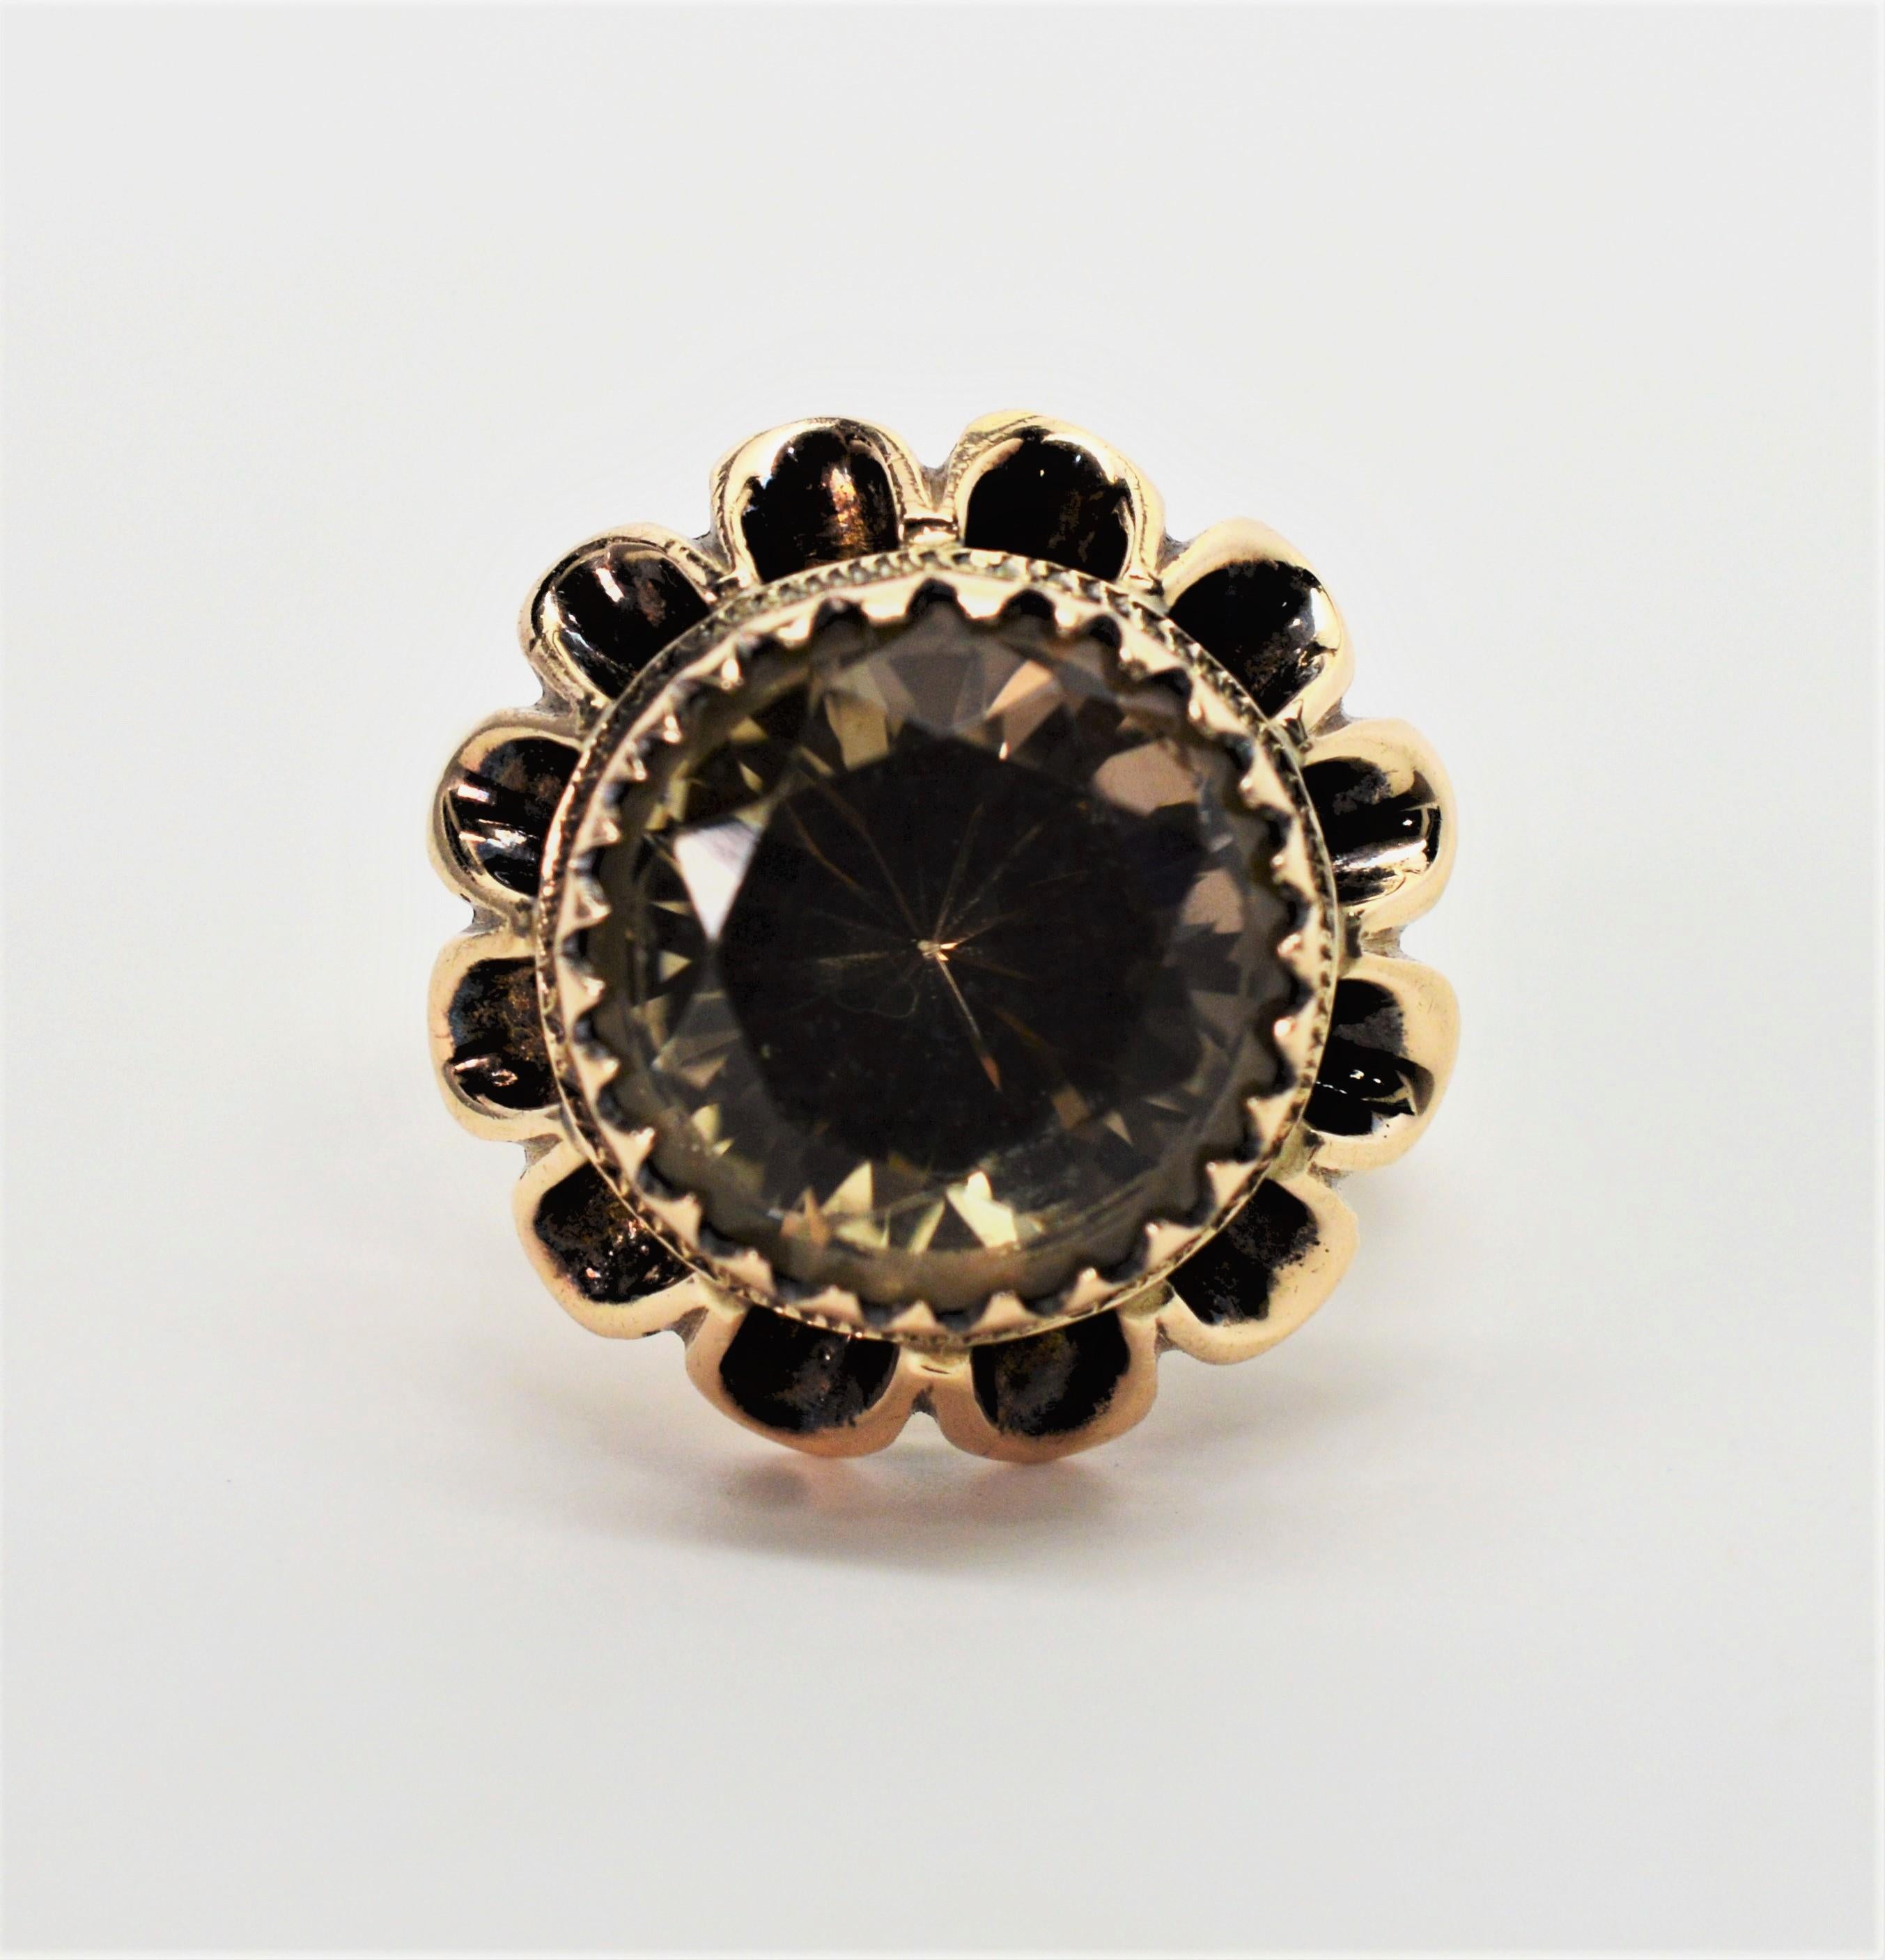 A six carat smoky topaz creates the warm center of this floral burst framed with pretty ten carat 10K yellow gold petals. The fantasy-cut, mocha colored round topaz stone measures 11.5 mm round and is poised in a raised setting presenting a pleasing